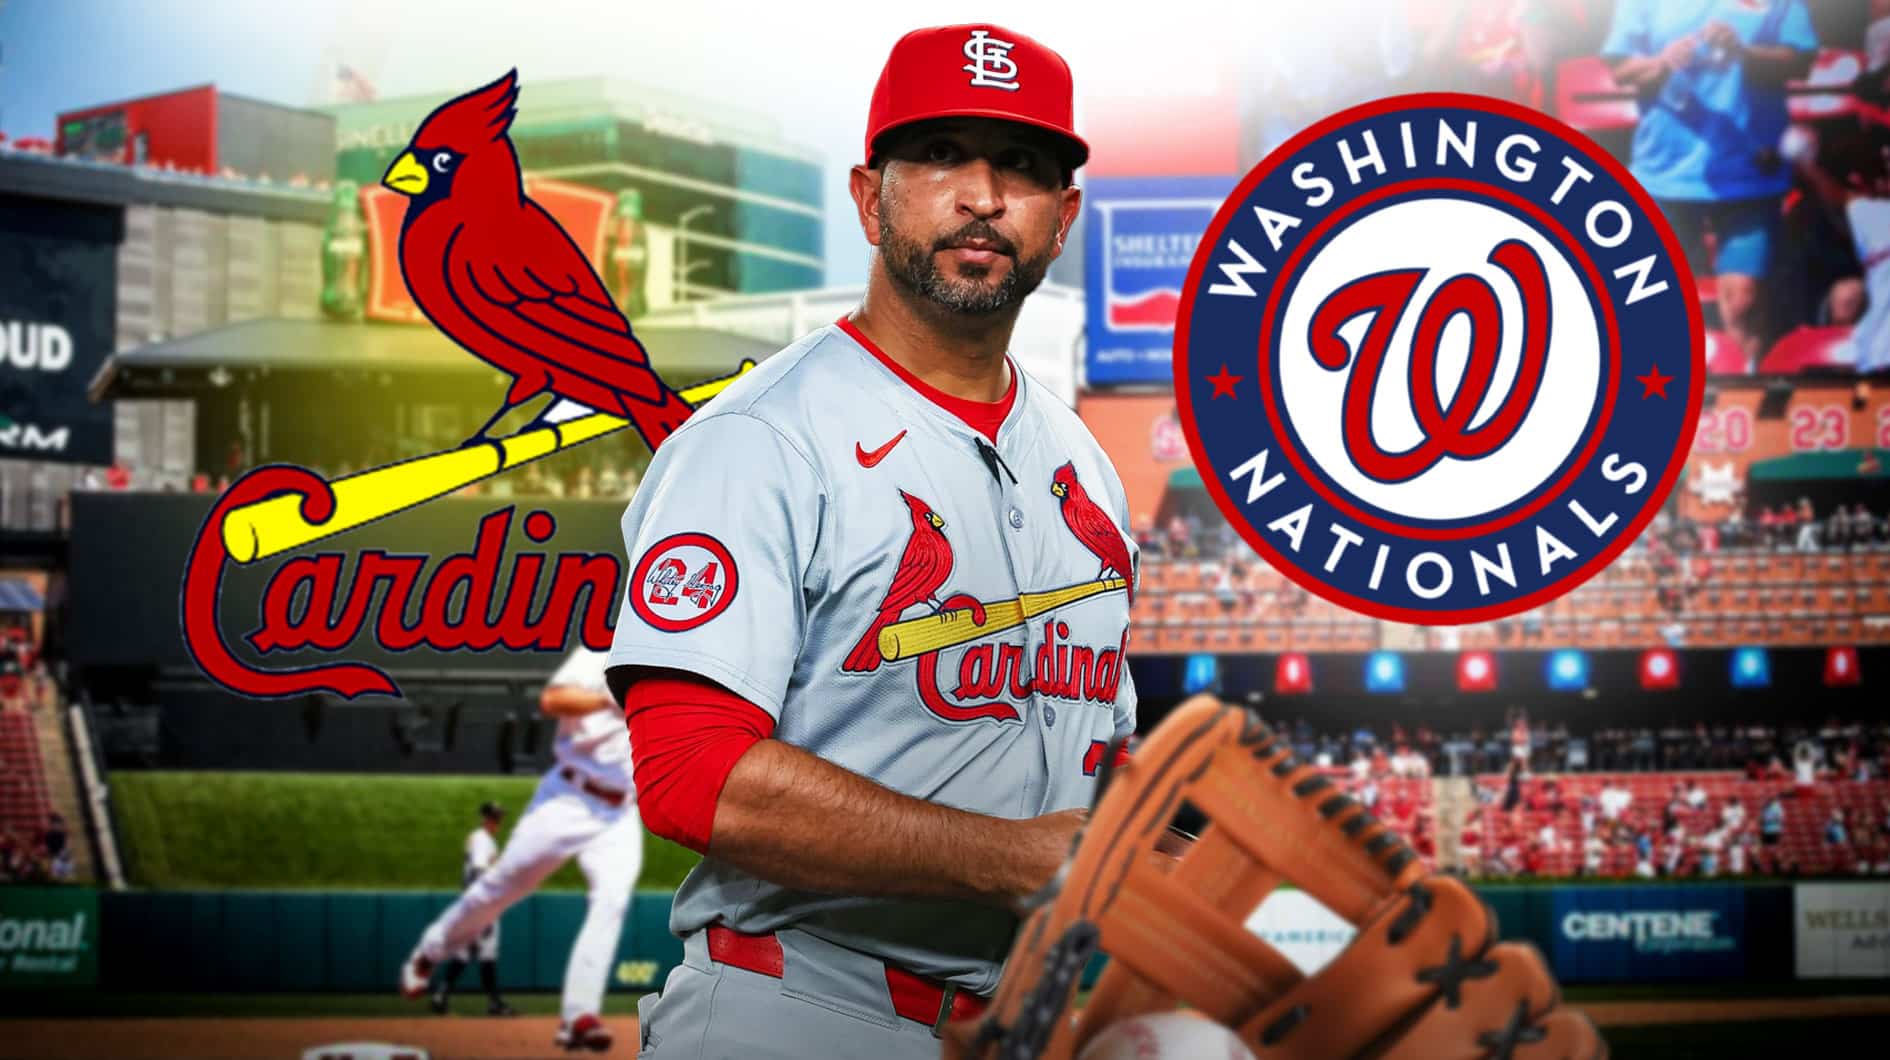 Cardinals' Oliver Marmol gets real about players' behavior during blowout Nationals loss